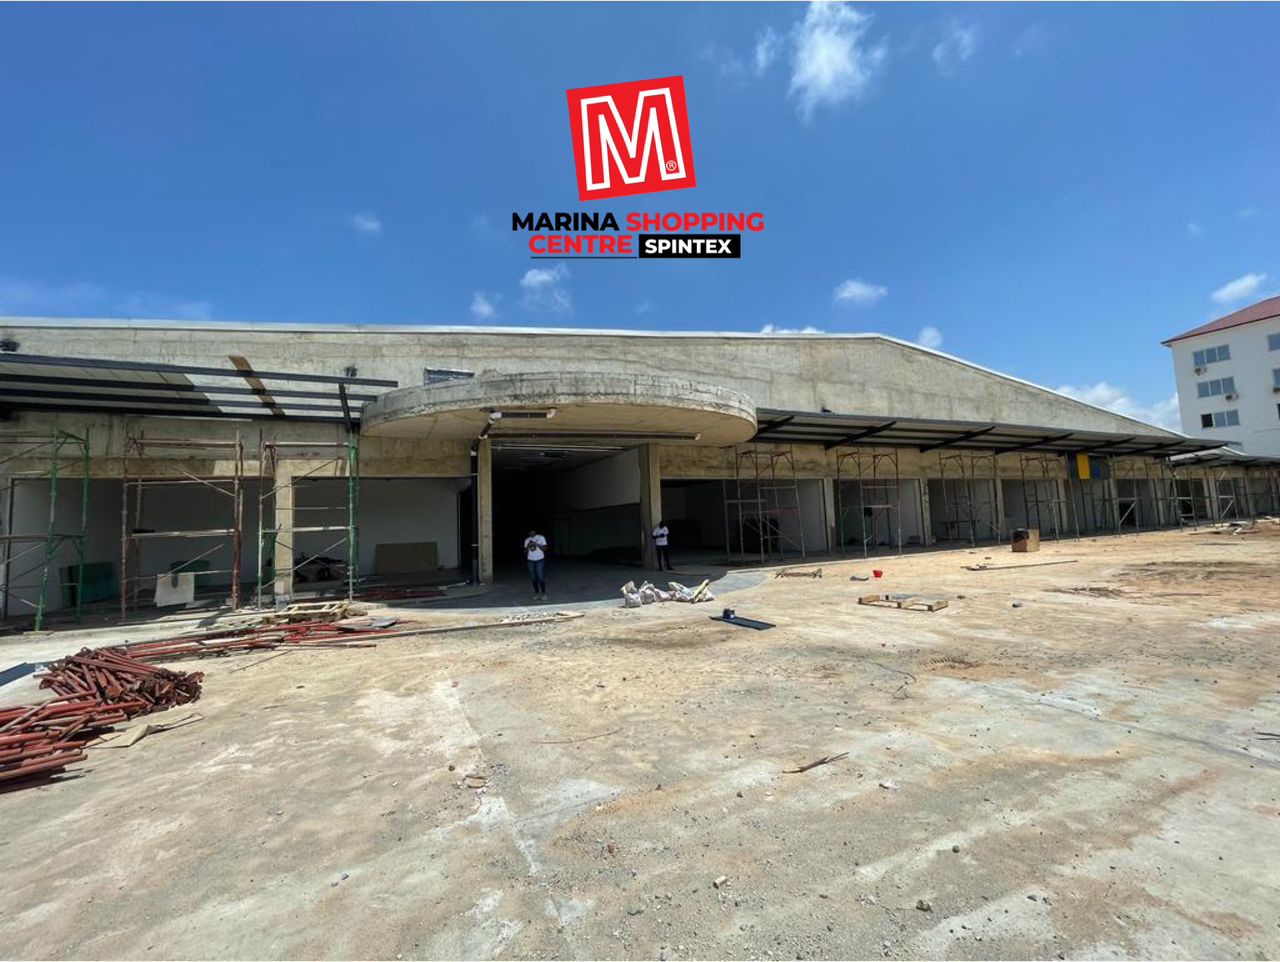 Prime Retail Spaces Available: Lease Your Ideal Shop or Restaurant at Marina Shopping Centre, Spintex